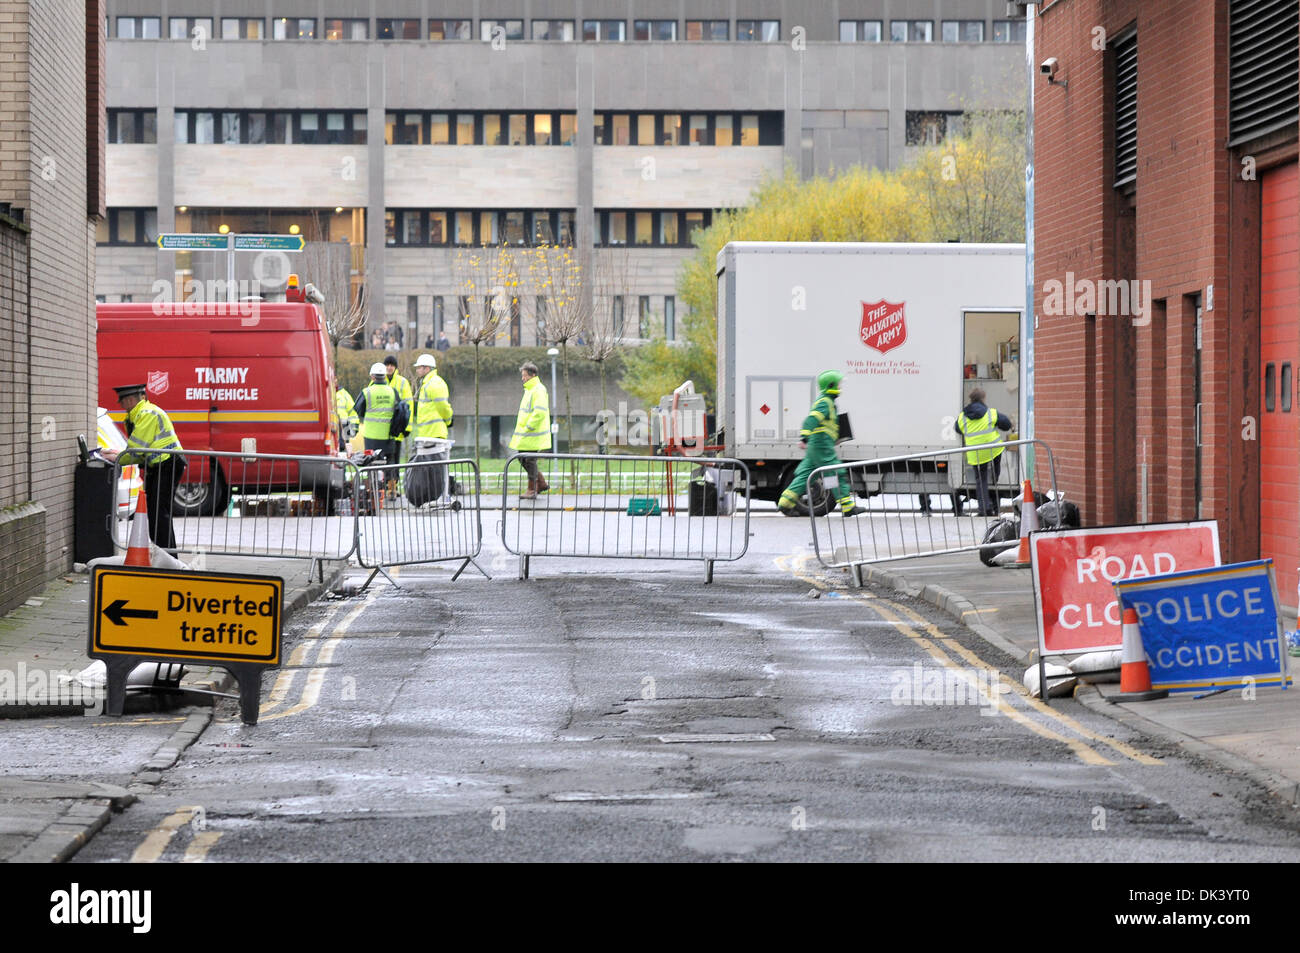 A road closure at the scene of  a major incident. Stock Photo